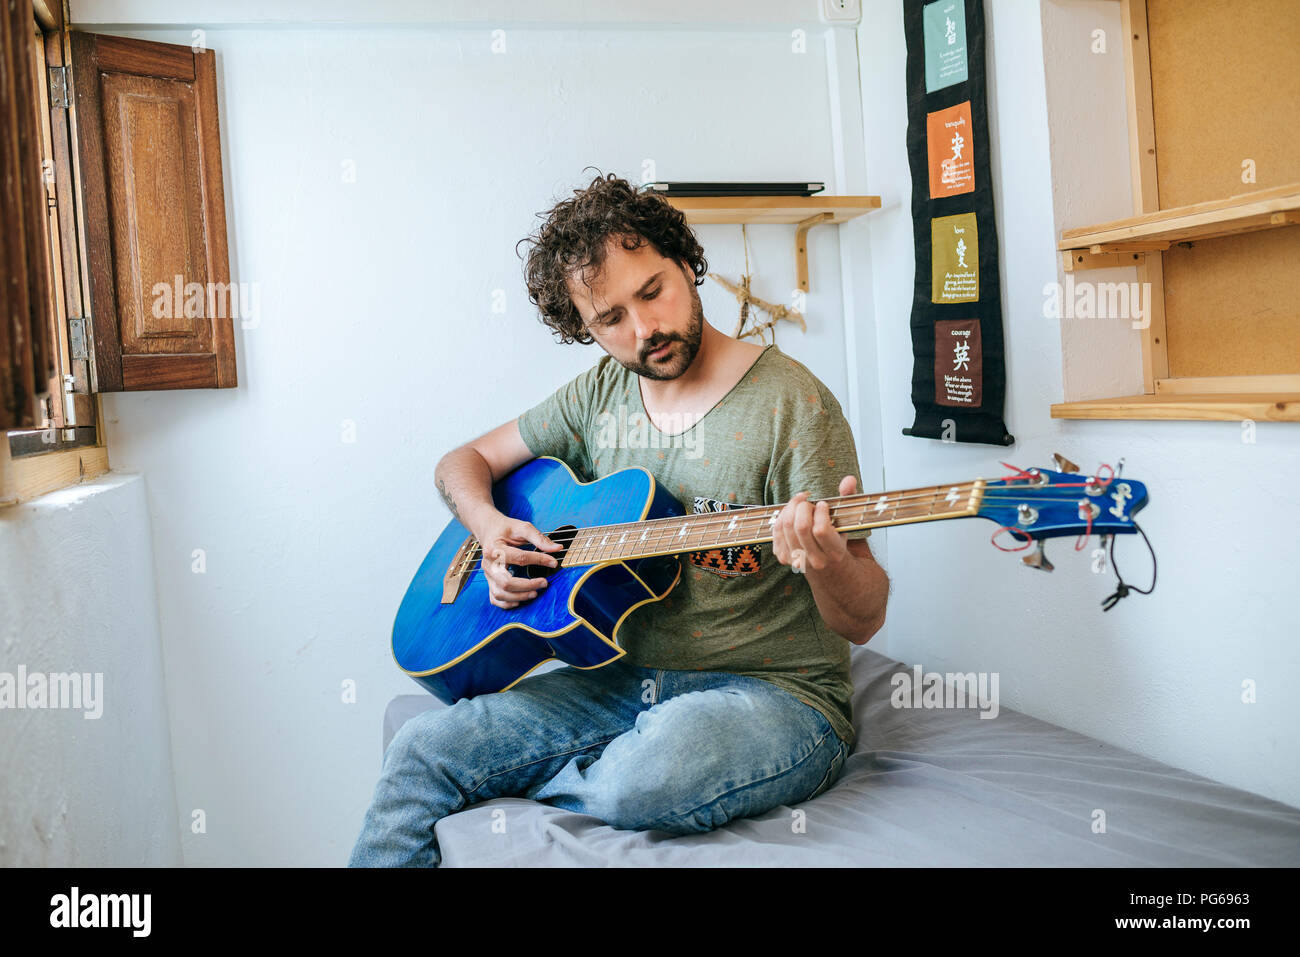 Spain, Man playing bass guitar in his room Stock Photo